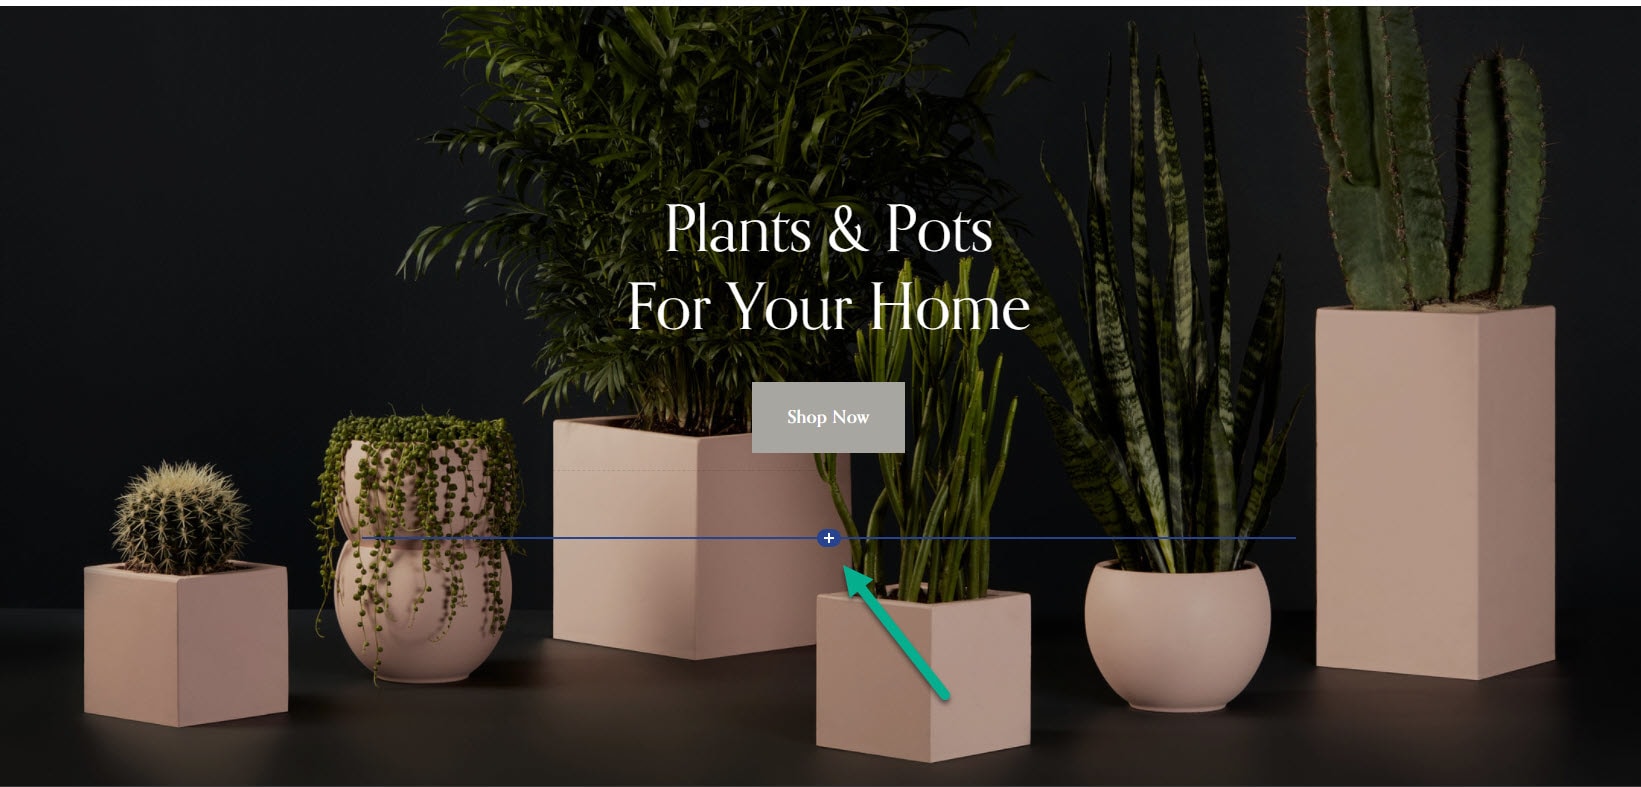 Add a block to your Squarespace site